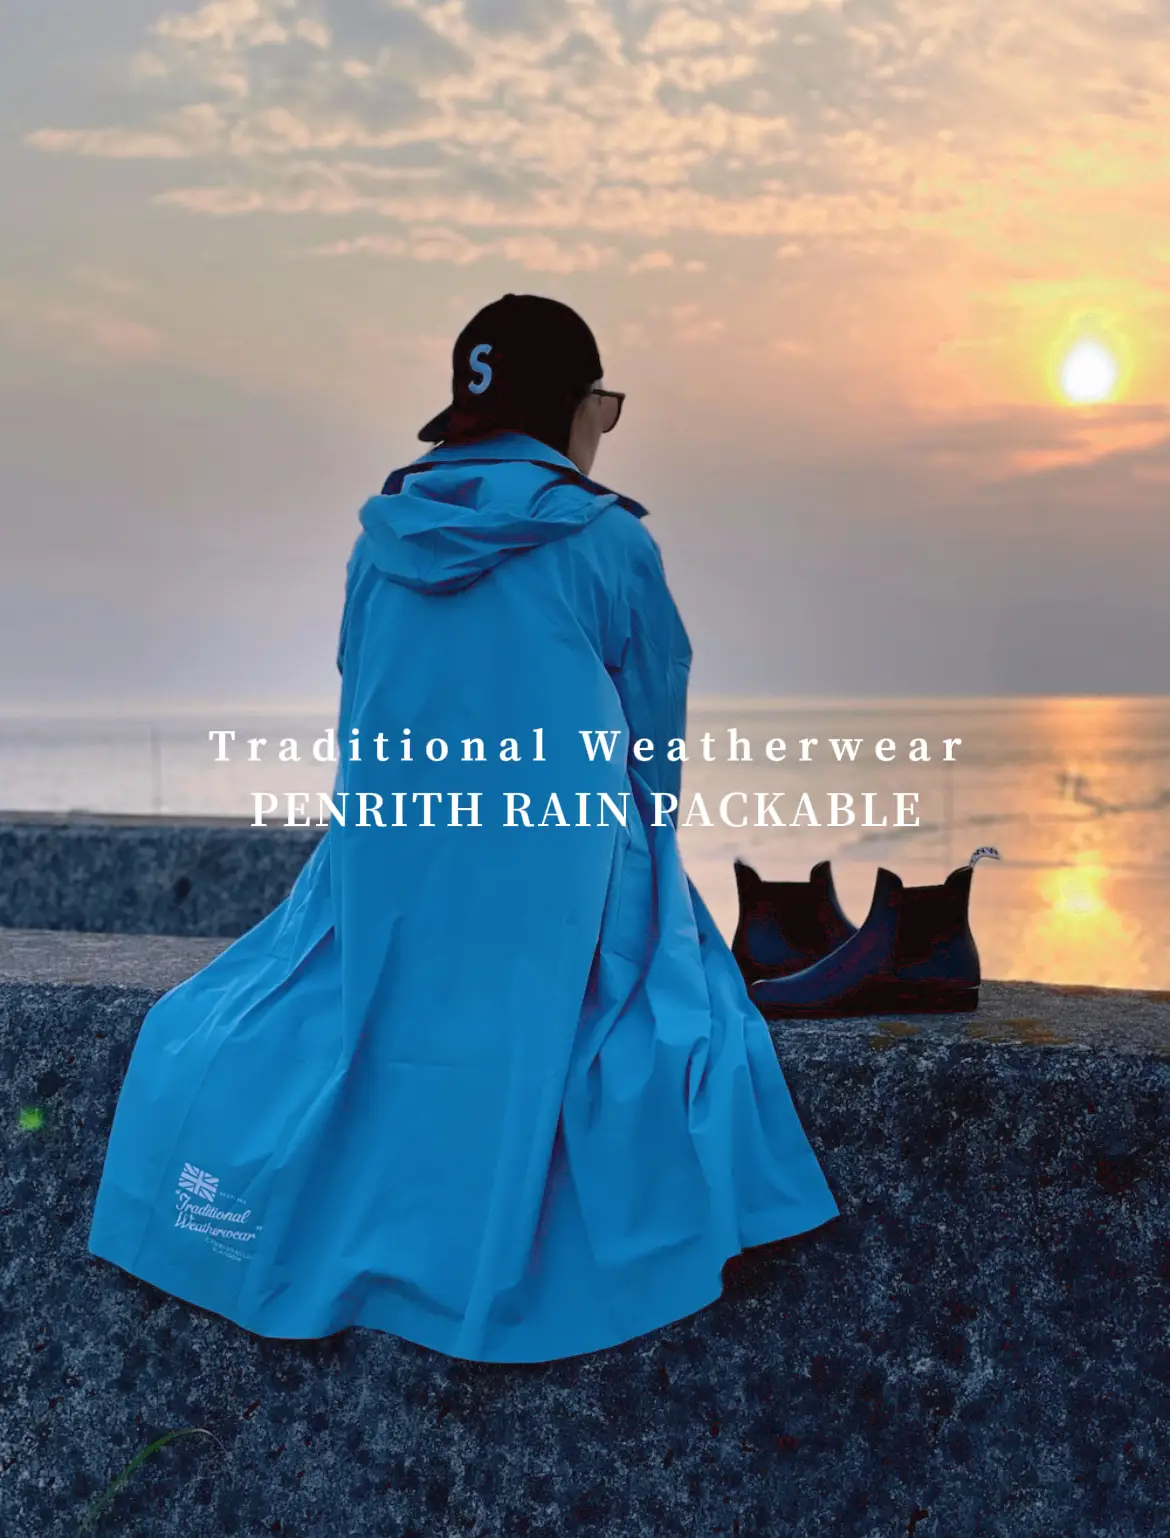 Traditional Weatherwear Packable Raincoat | Gallery posted by Ma